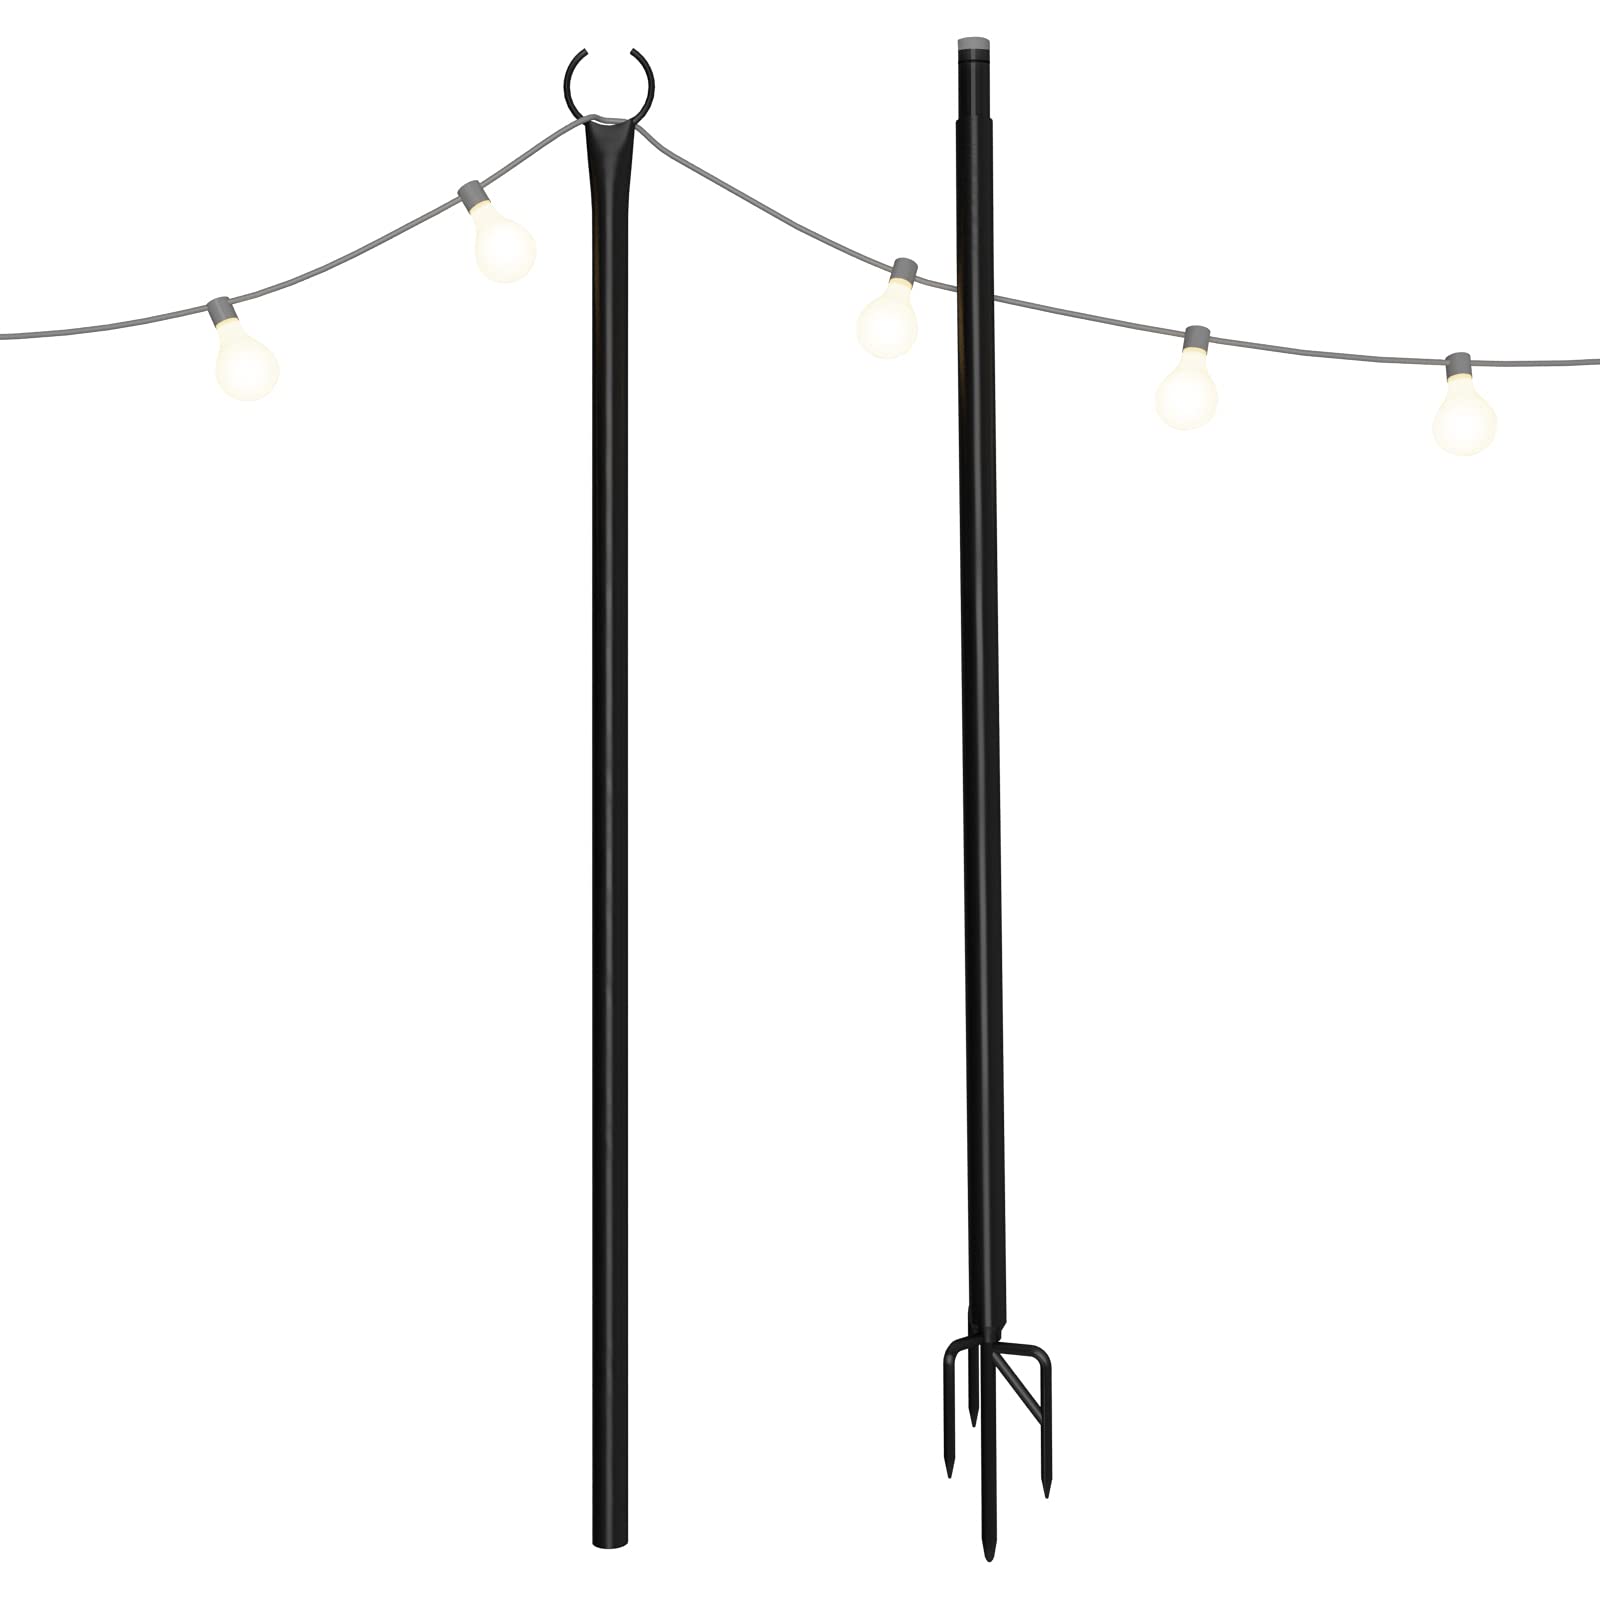 Holiday Styling String Light Pole for Outdoor String Lights - Christmas Light Pole with Hooks to Hang Up LED Lighting - Outside Patio Stand & Hanger for Garden, Backyard, Parties, Bistro & Weddings